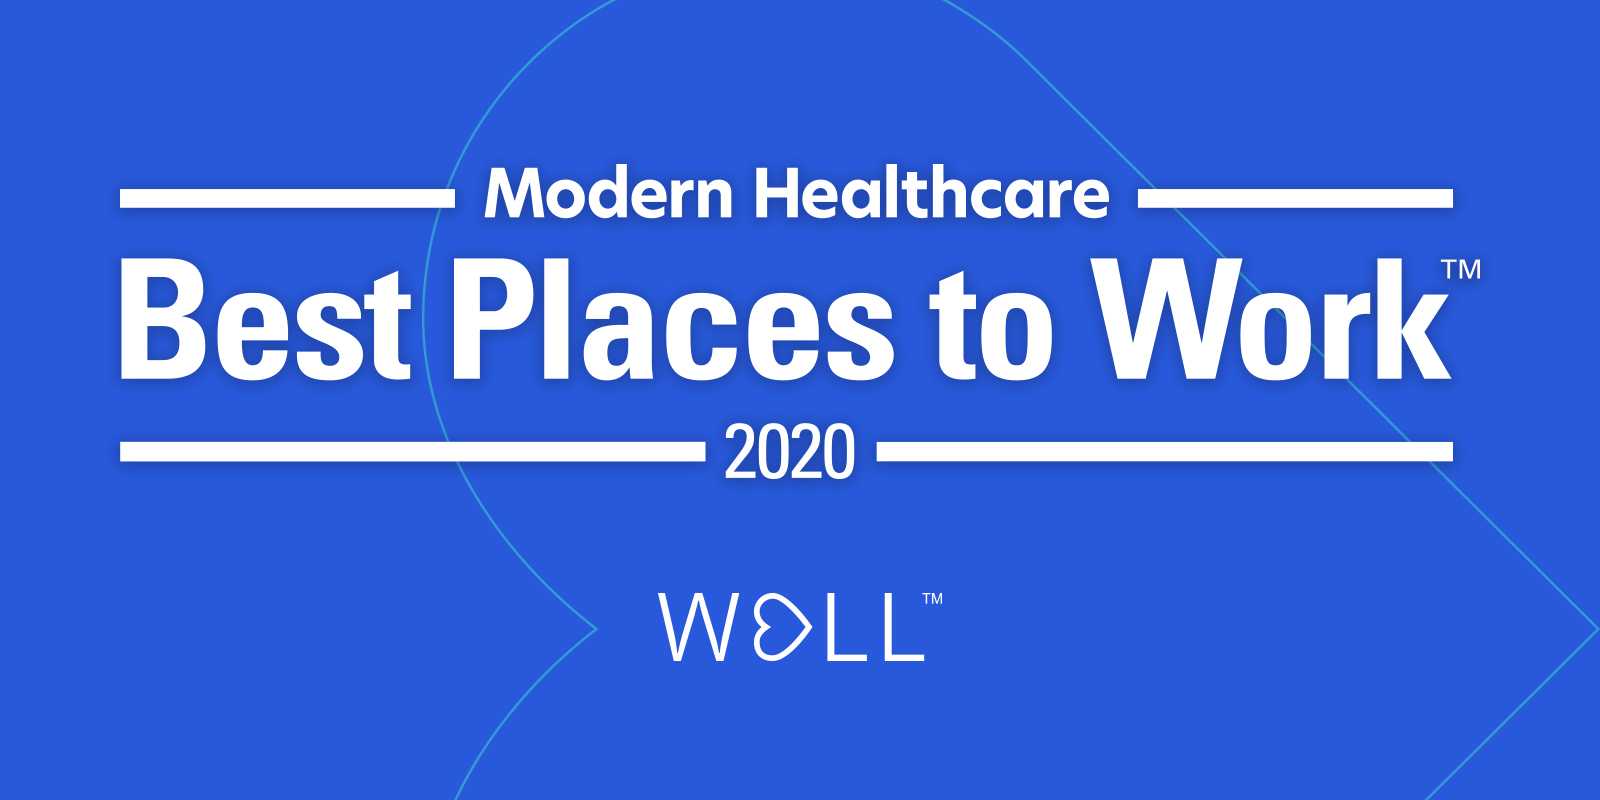 Best-places-to-work-modern-healthcare-1